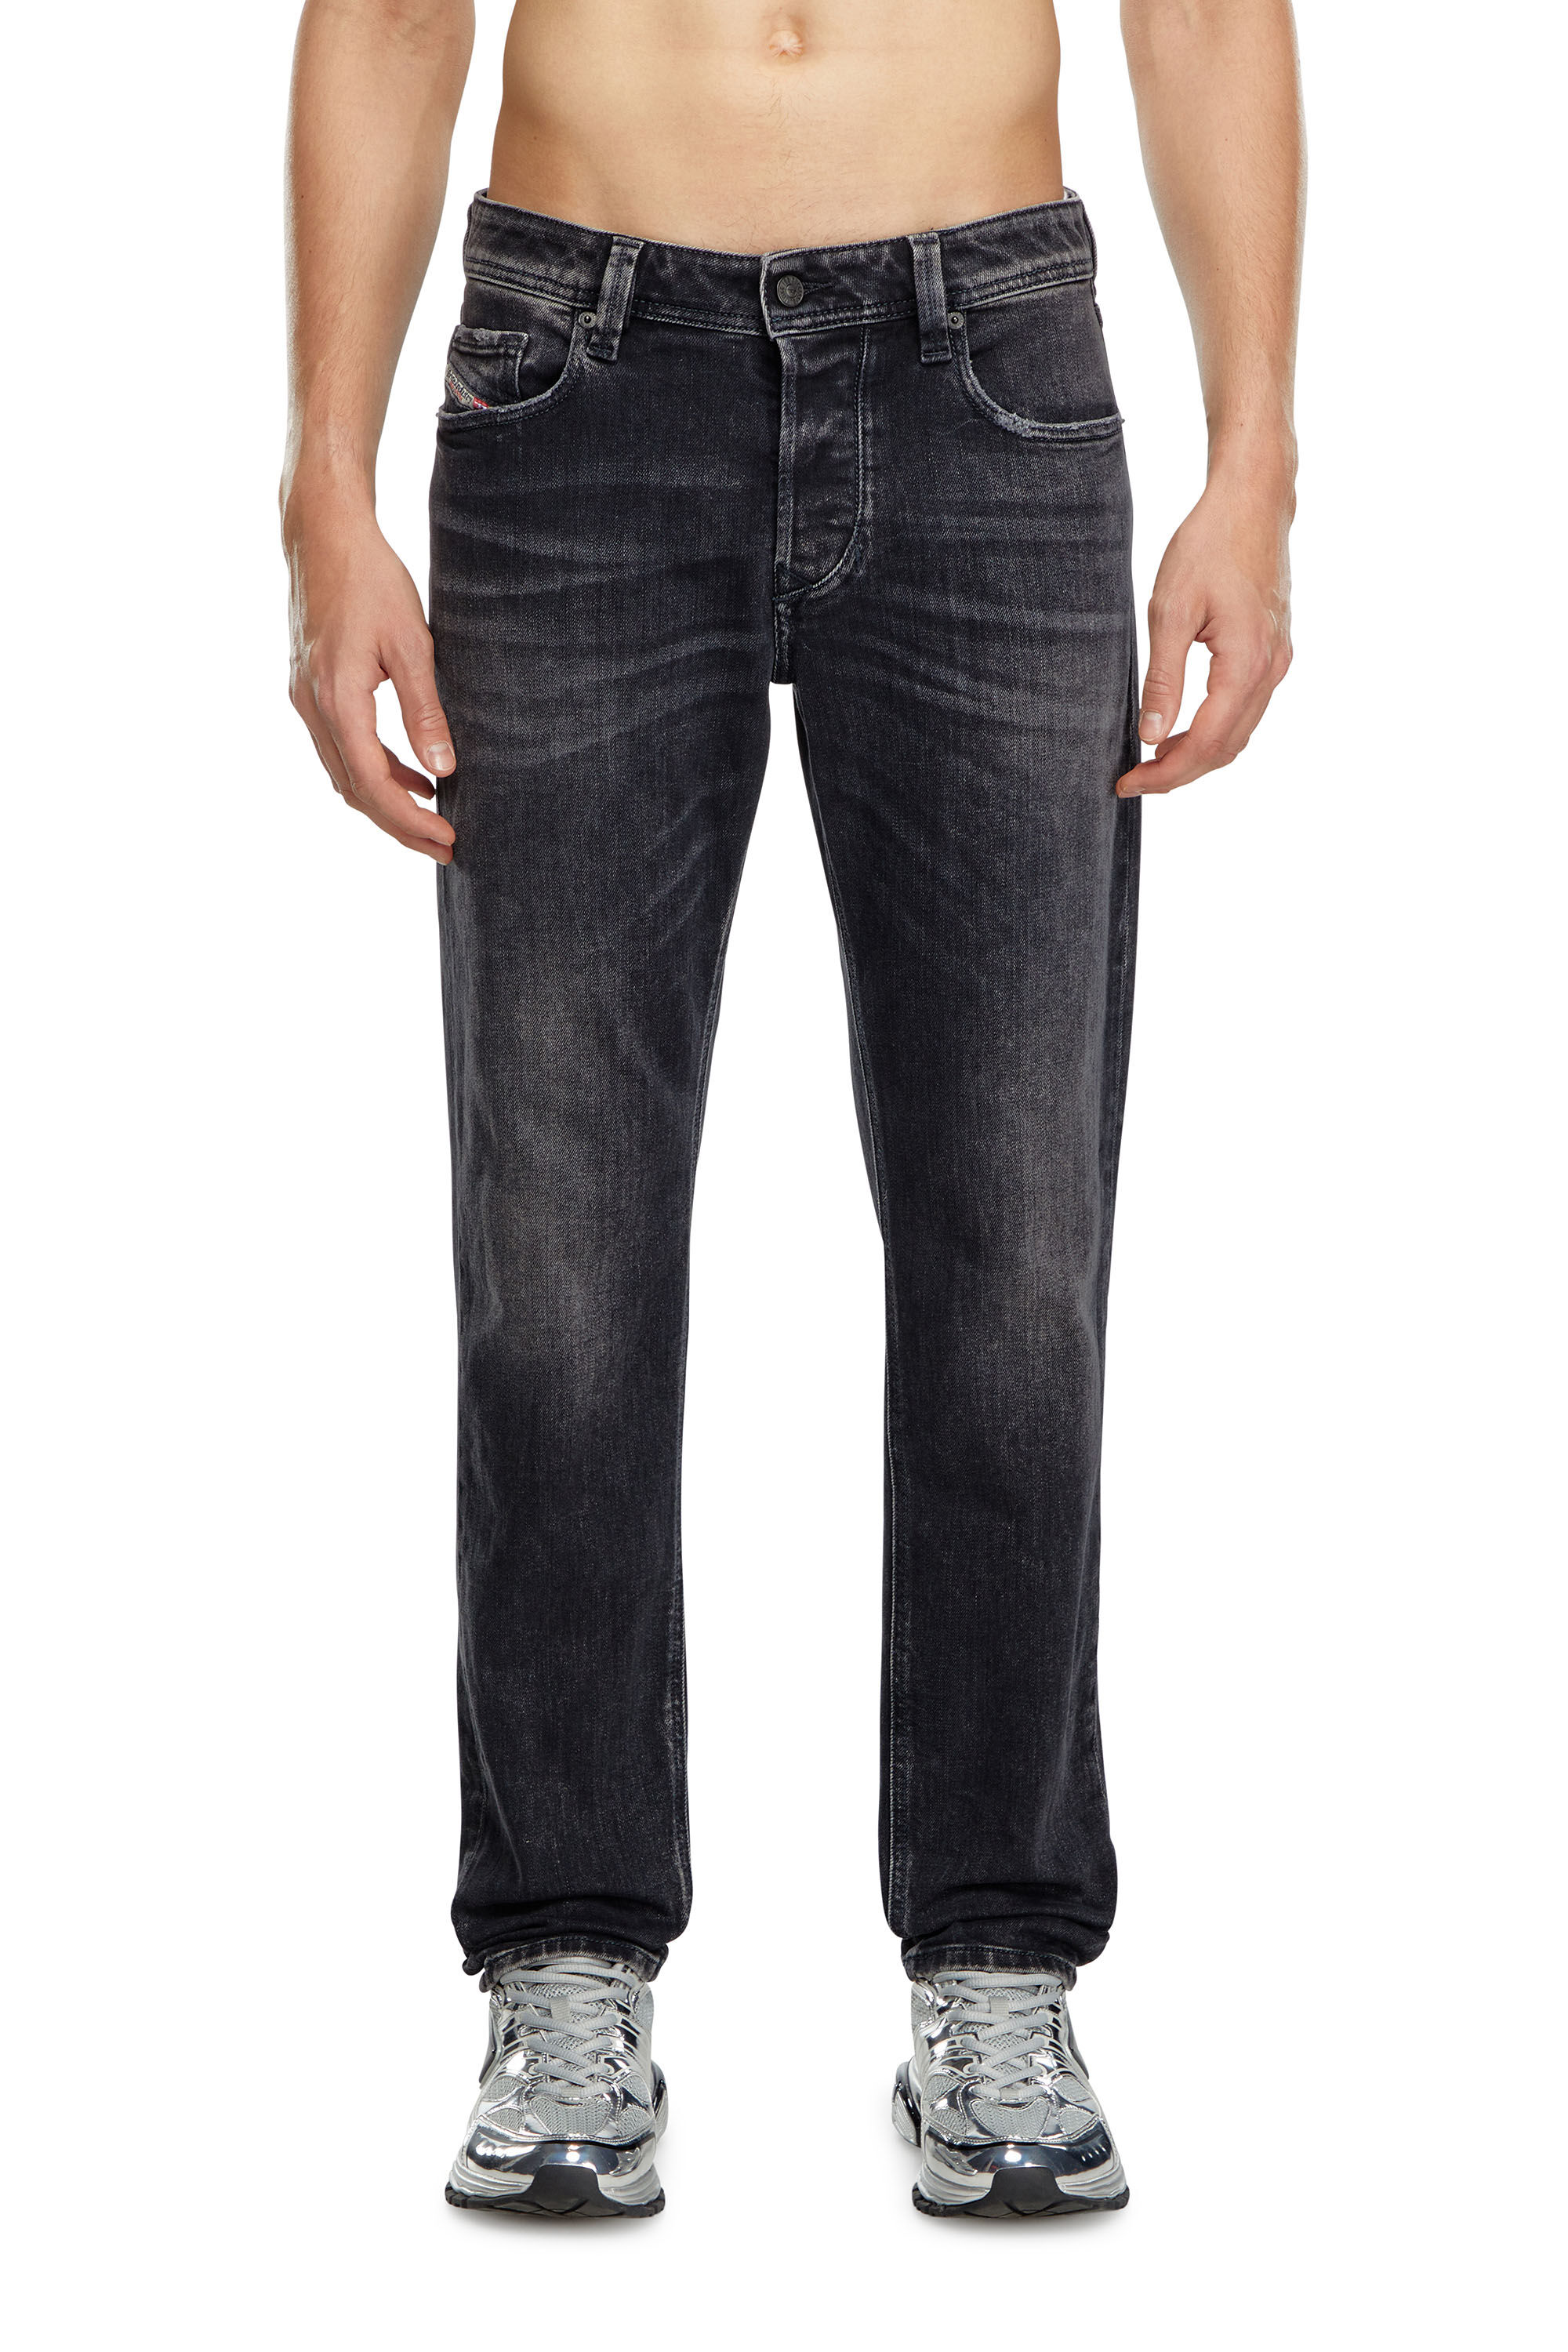 Diesel - Tapered Jeans 1986 Larkee-Beex 09K51, Hombre Tapered Jeans - 1986 Larkee-Beex in Negro - Image 3